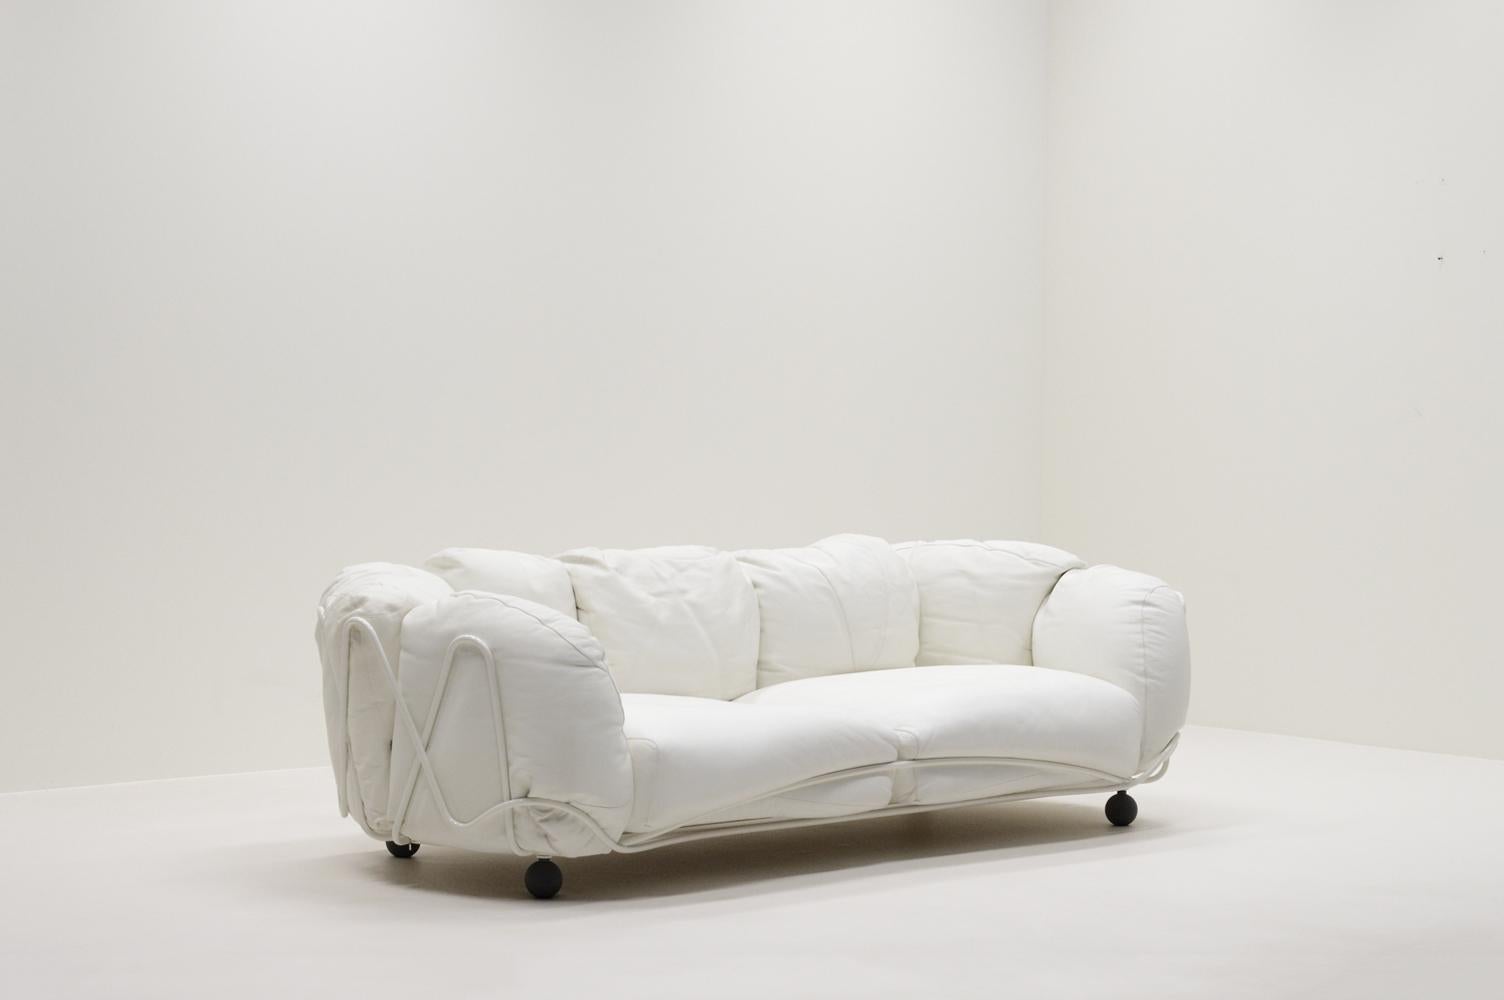 Rare Corbeille lounge sofa by Francesco Binfaré for Edra, Italy. 3 seater sofa with a white basketshaped woven metal structure and filled with white leather, informal, loosely covered cushions. Hand made and high quality leater. The seat cushions